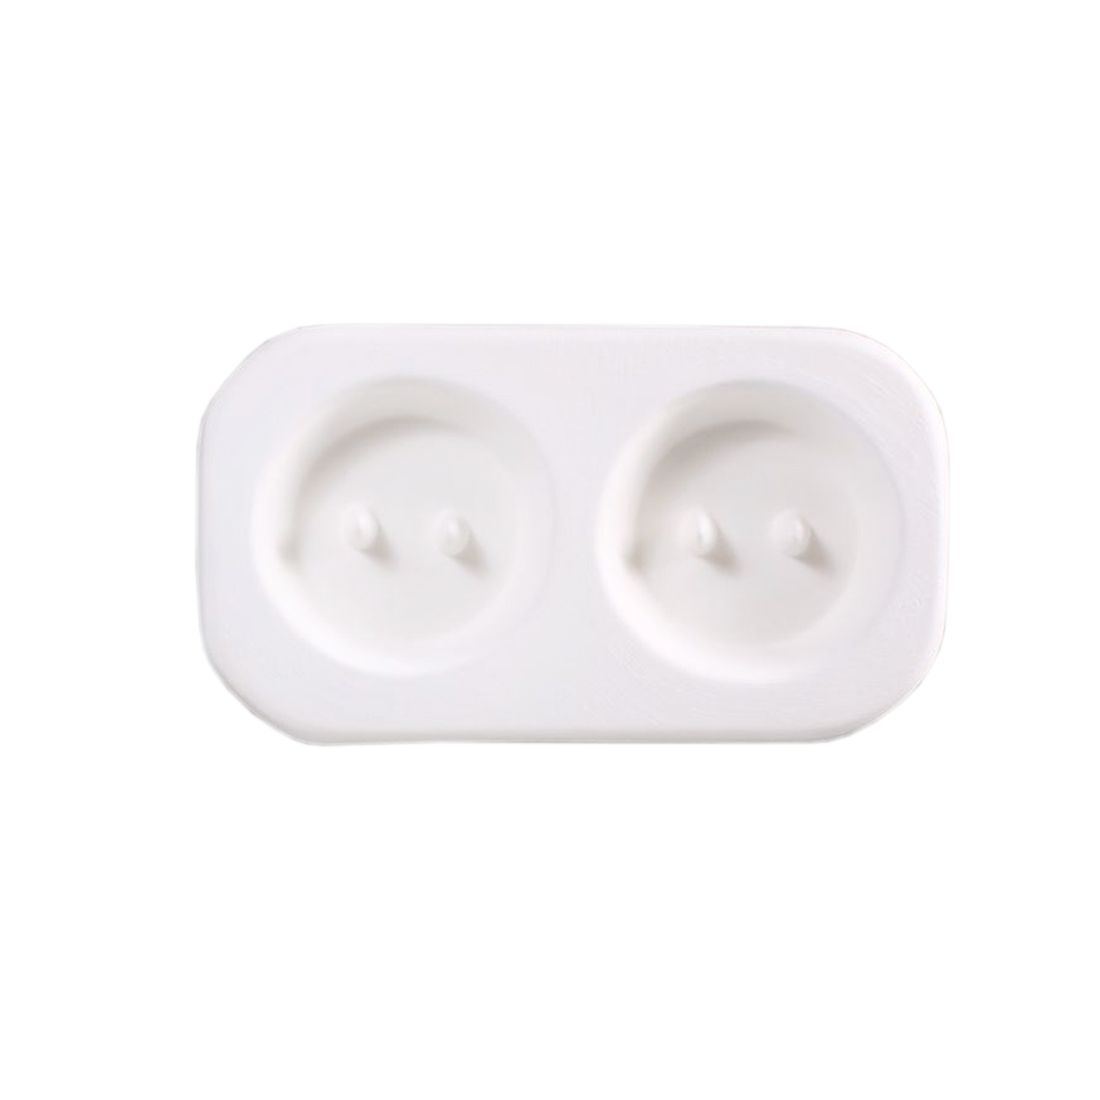 HOLEY BUTTONS - 2 LARGE ROUND by CPI